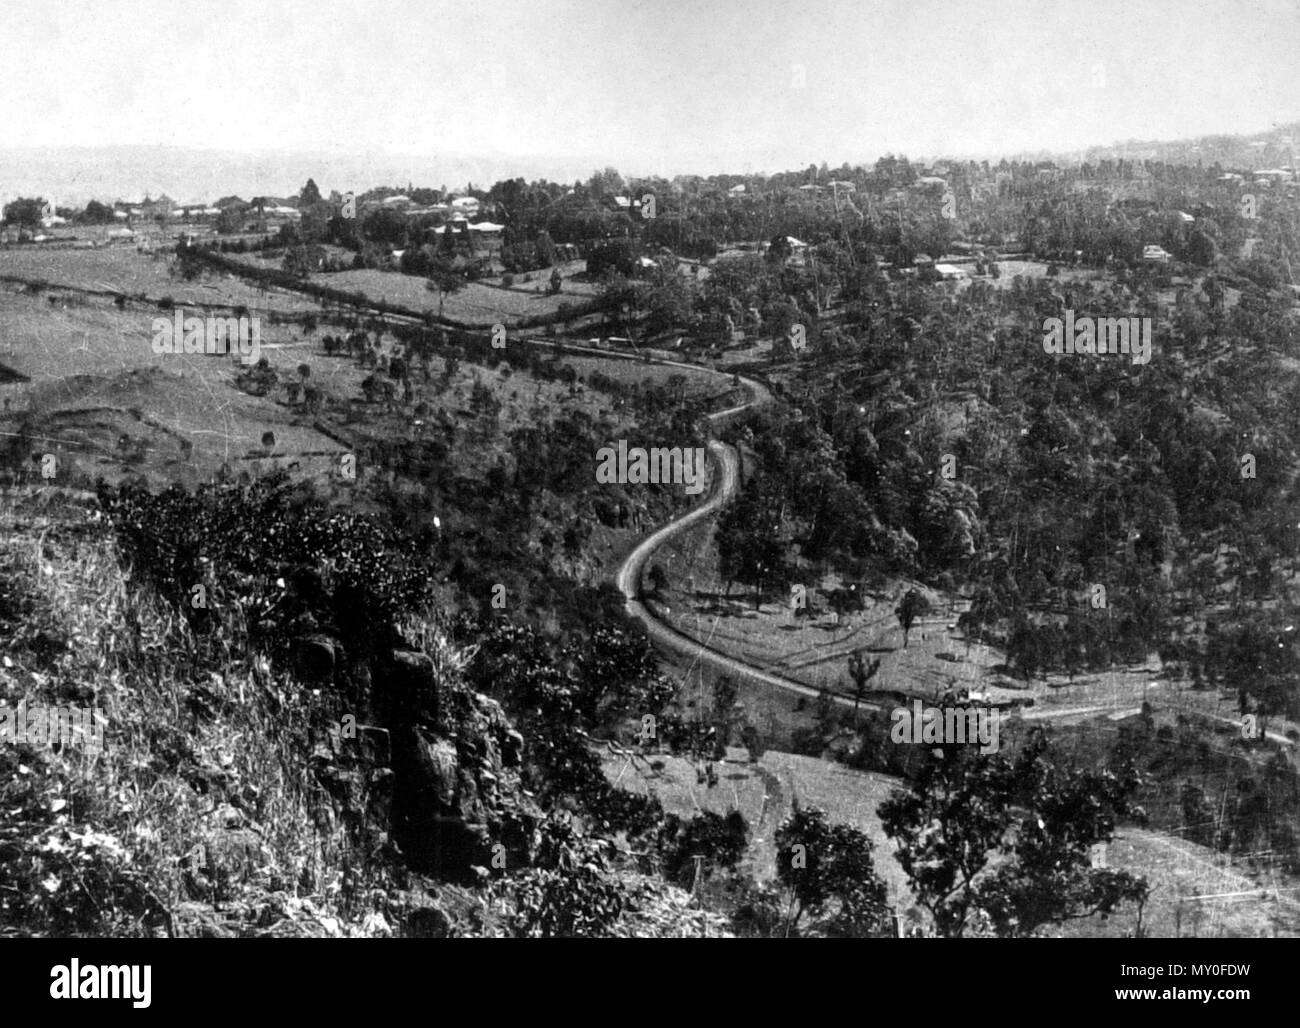 Toll Bar Road, Brisbane to Toowoomba, c 1934. ATTEMPTED HOLD-UP. 173324969?searchTerm=toll bar road toowoomba&amp;searchLimits=l-state=Queensland|||l-word=100+-+1000+Words )   ON TOLL BAR ROAD.  TOOWOOMBA SENSATION.  TOOWOOMBA, Nov. 30. - After barricading the Toll Bar-road at one of its steepest sections a masked man attempted to hold up the driver of a motor-truck last night, but the driver of the truck accelerated and escaped.  According to the police report, Stanley Poore was driving a truck down the Toll Bar-raod about 9.15 p.m. When taking a bend Poore saw a number of saplings and rails  Stock Photo